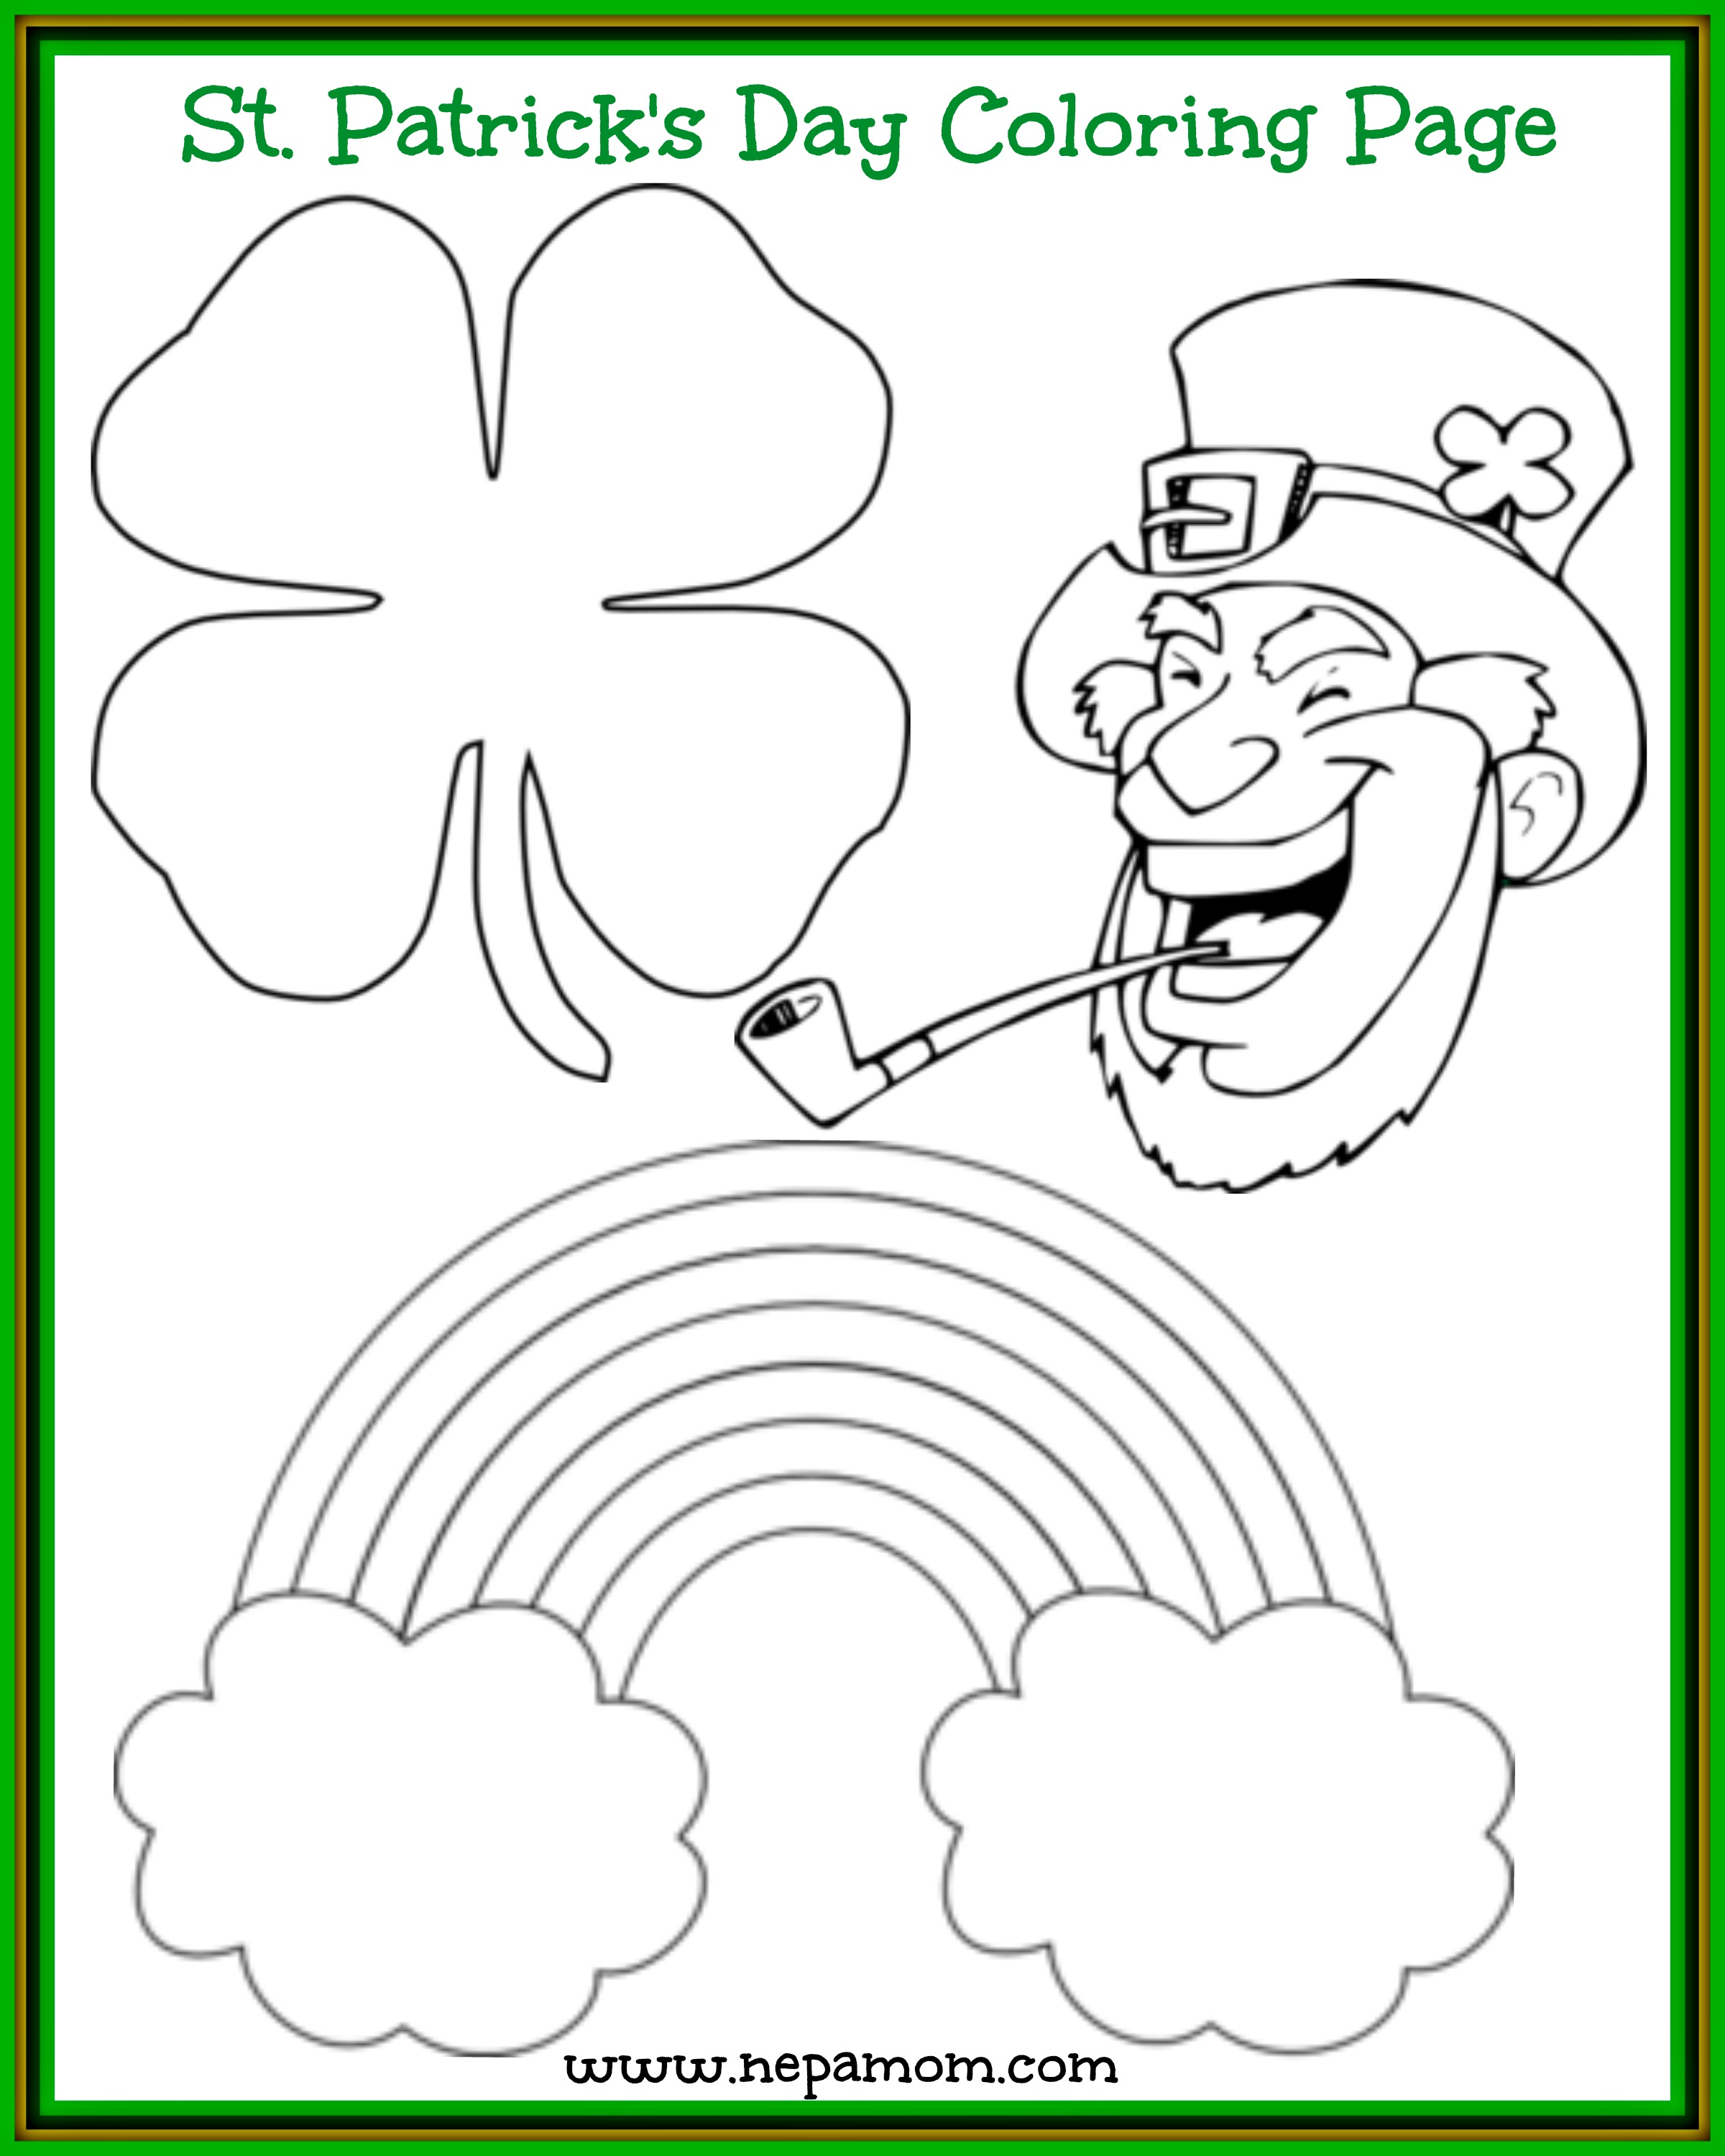 St Patrick's Day Coloring Page - NEPA Mom